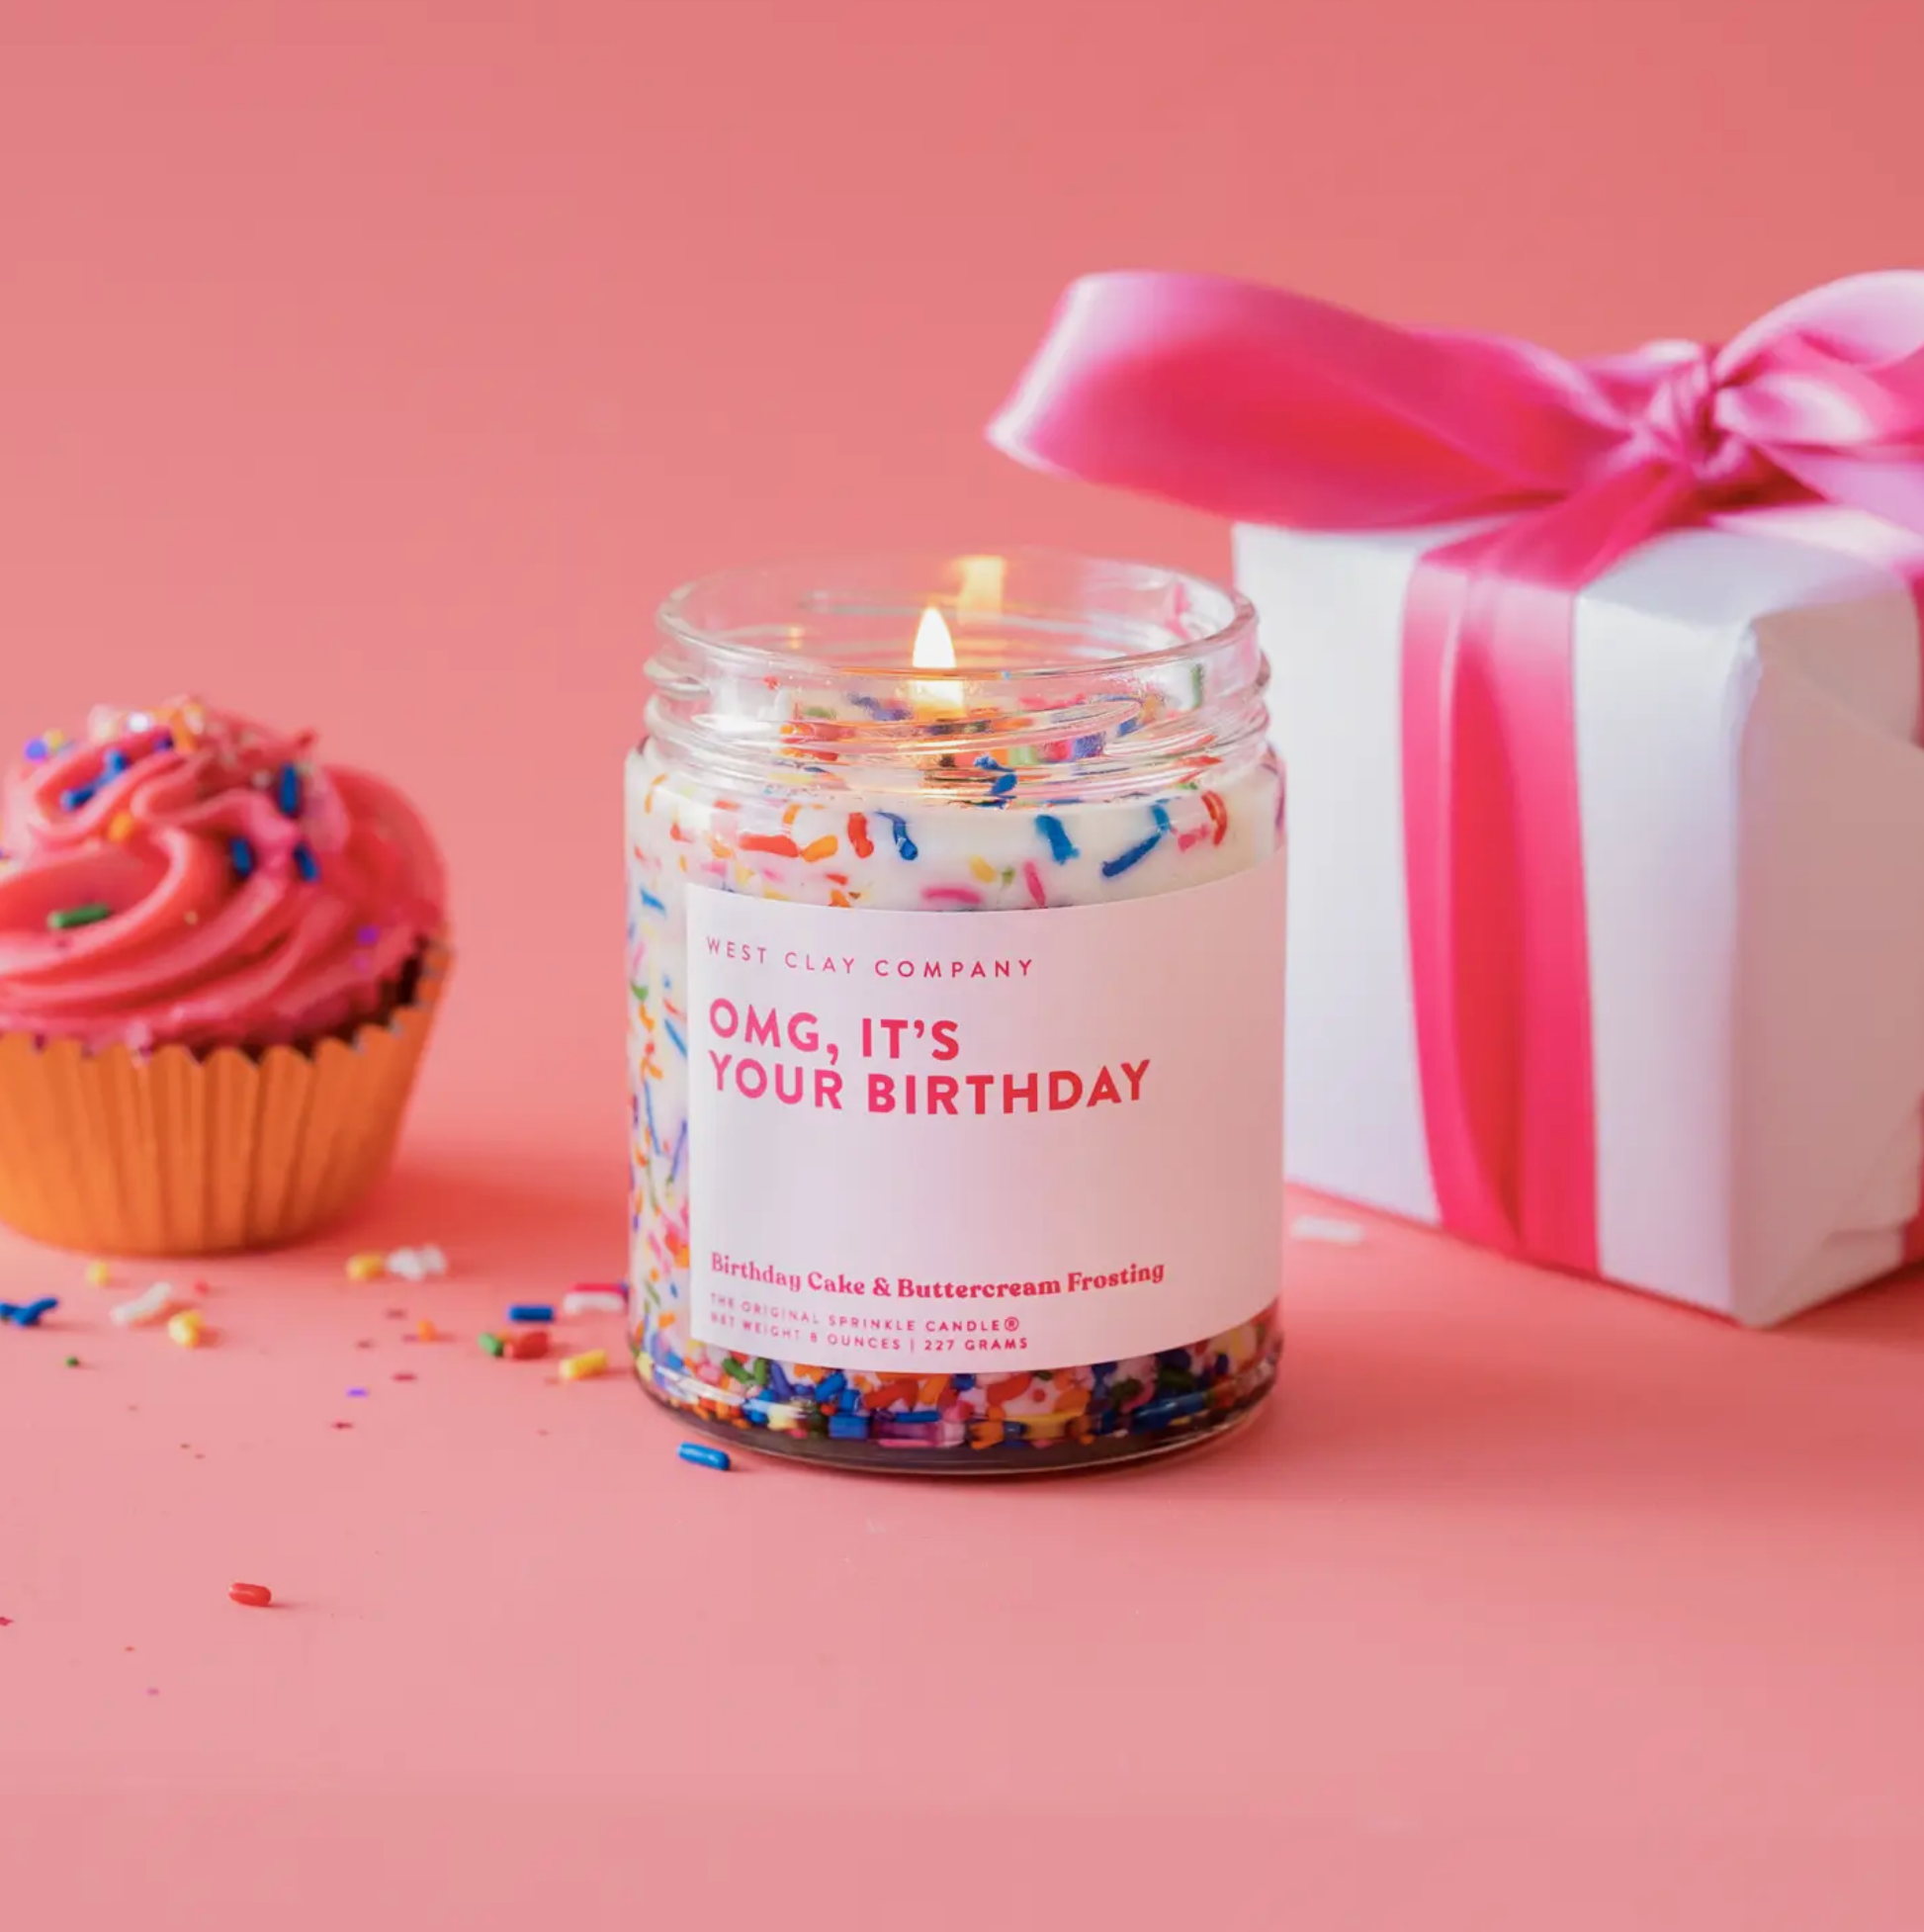 "OMG, It's Your Birthday" candle with cupcake and present